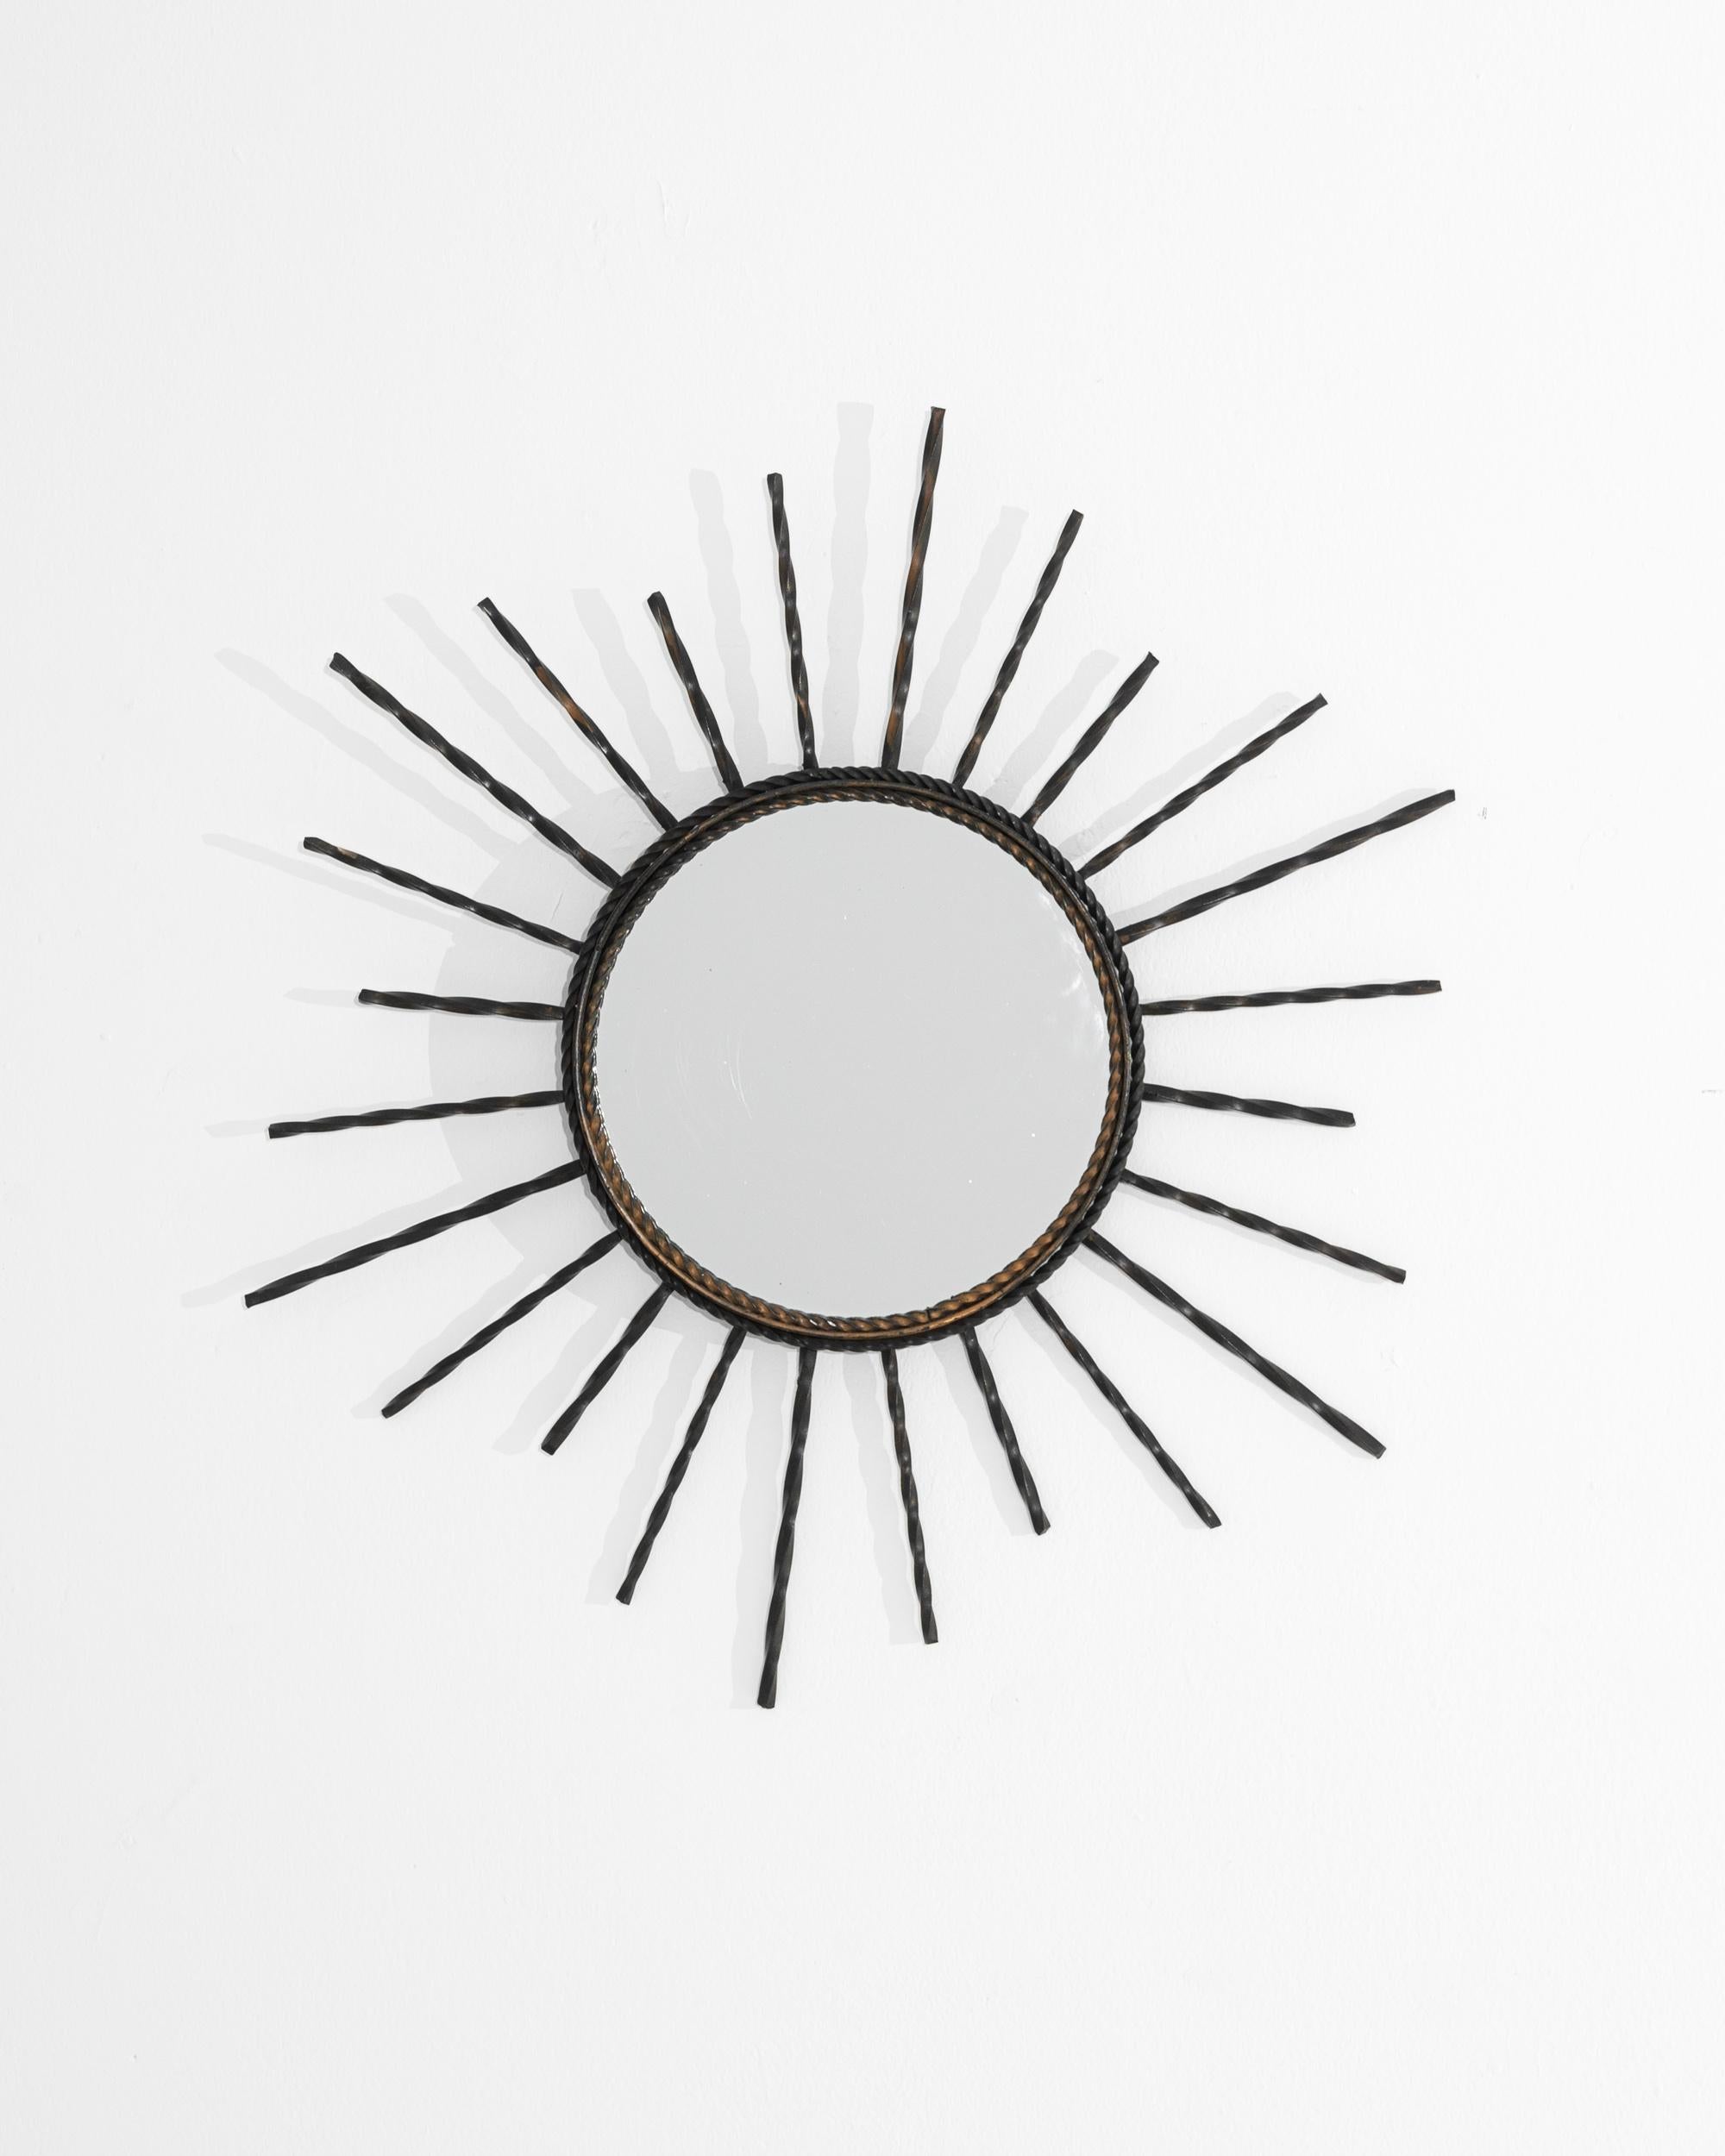 A vintage metal mirror from France. This small glass mirror is wreathed in an explosion of twisted metal lines. These energetic rays create a playful animation that plays around the mirror’s circumference. Promising to bring more grace and levity to